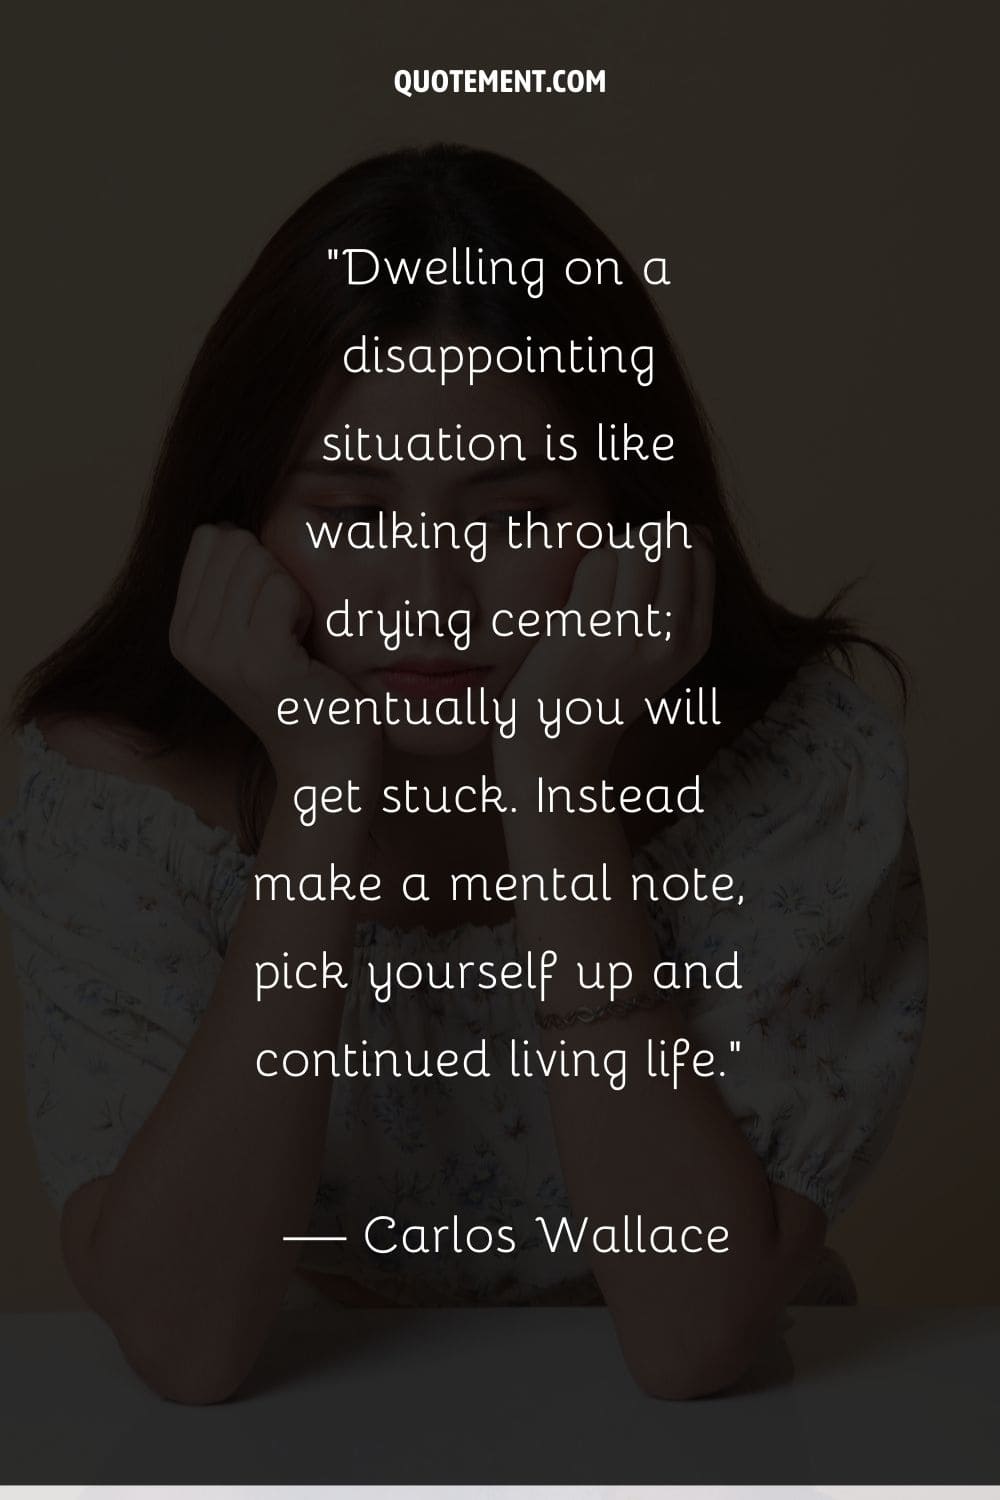 Dwelling on a disappointing situation is like walking through drying cement